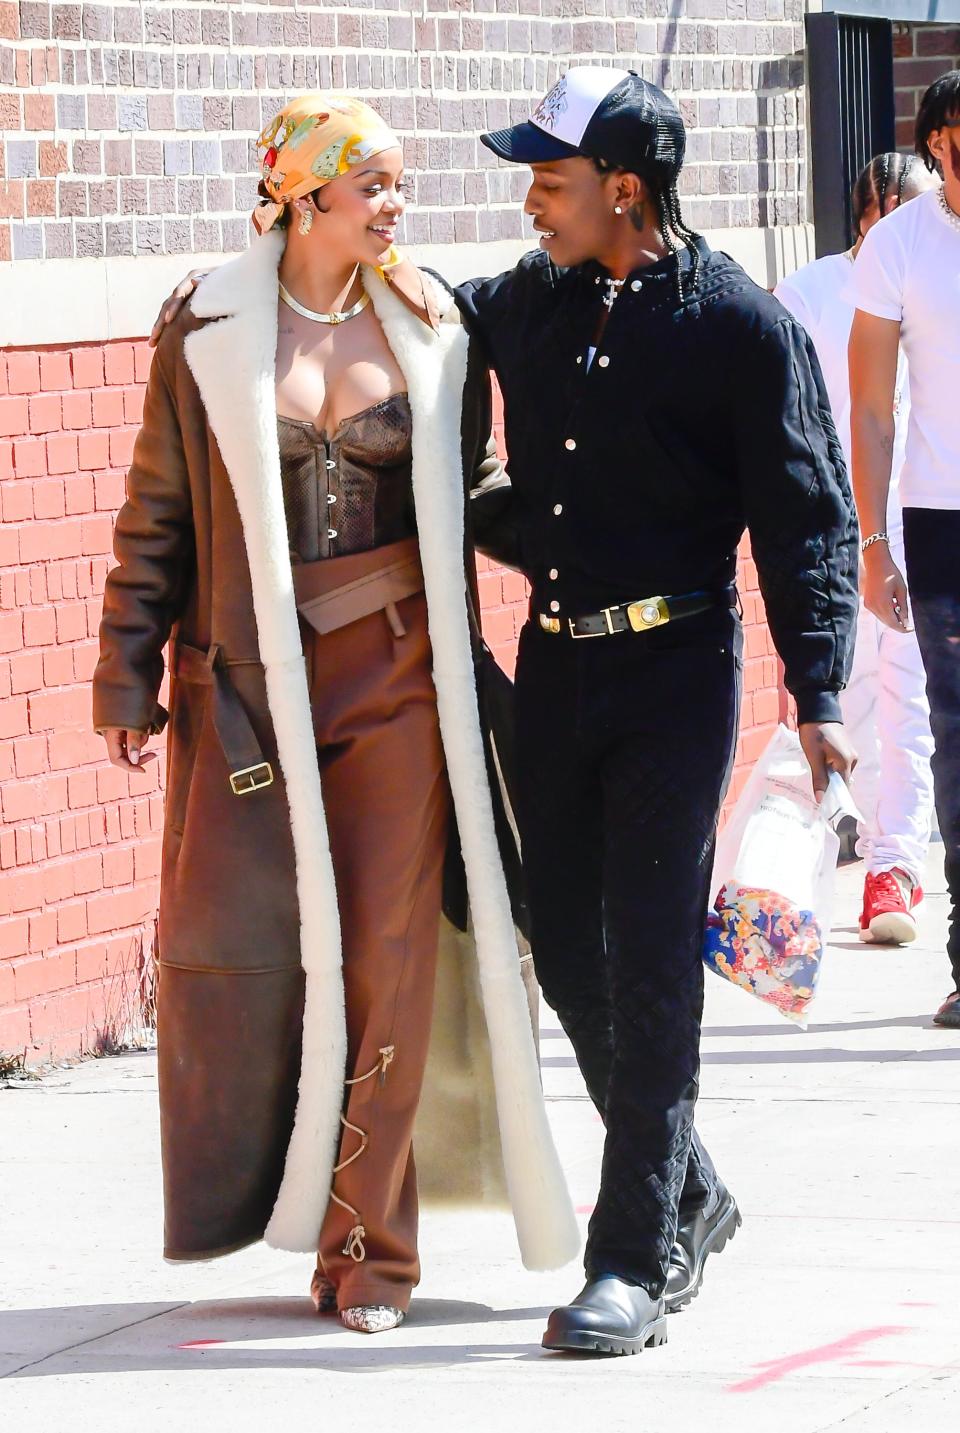 Rihanna and A$AP Rocky are seen filming a music video in the Bronx on July 10, 2021 in New York City.